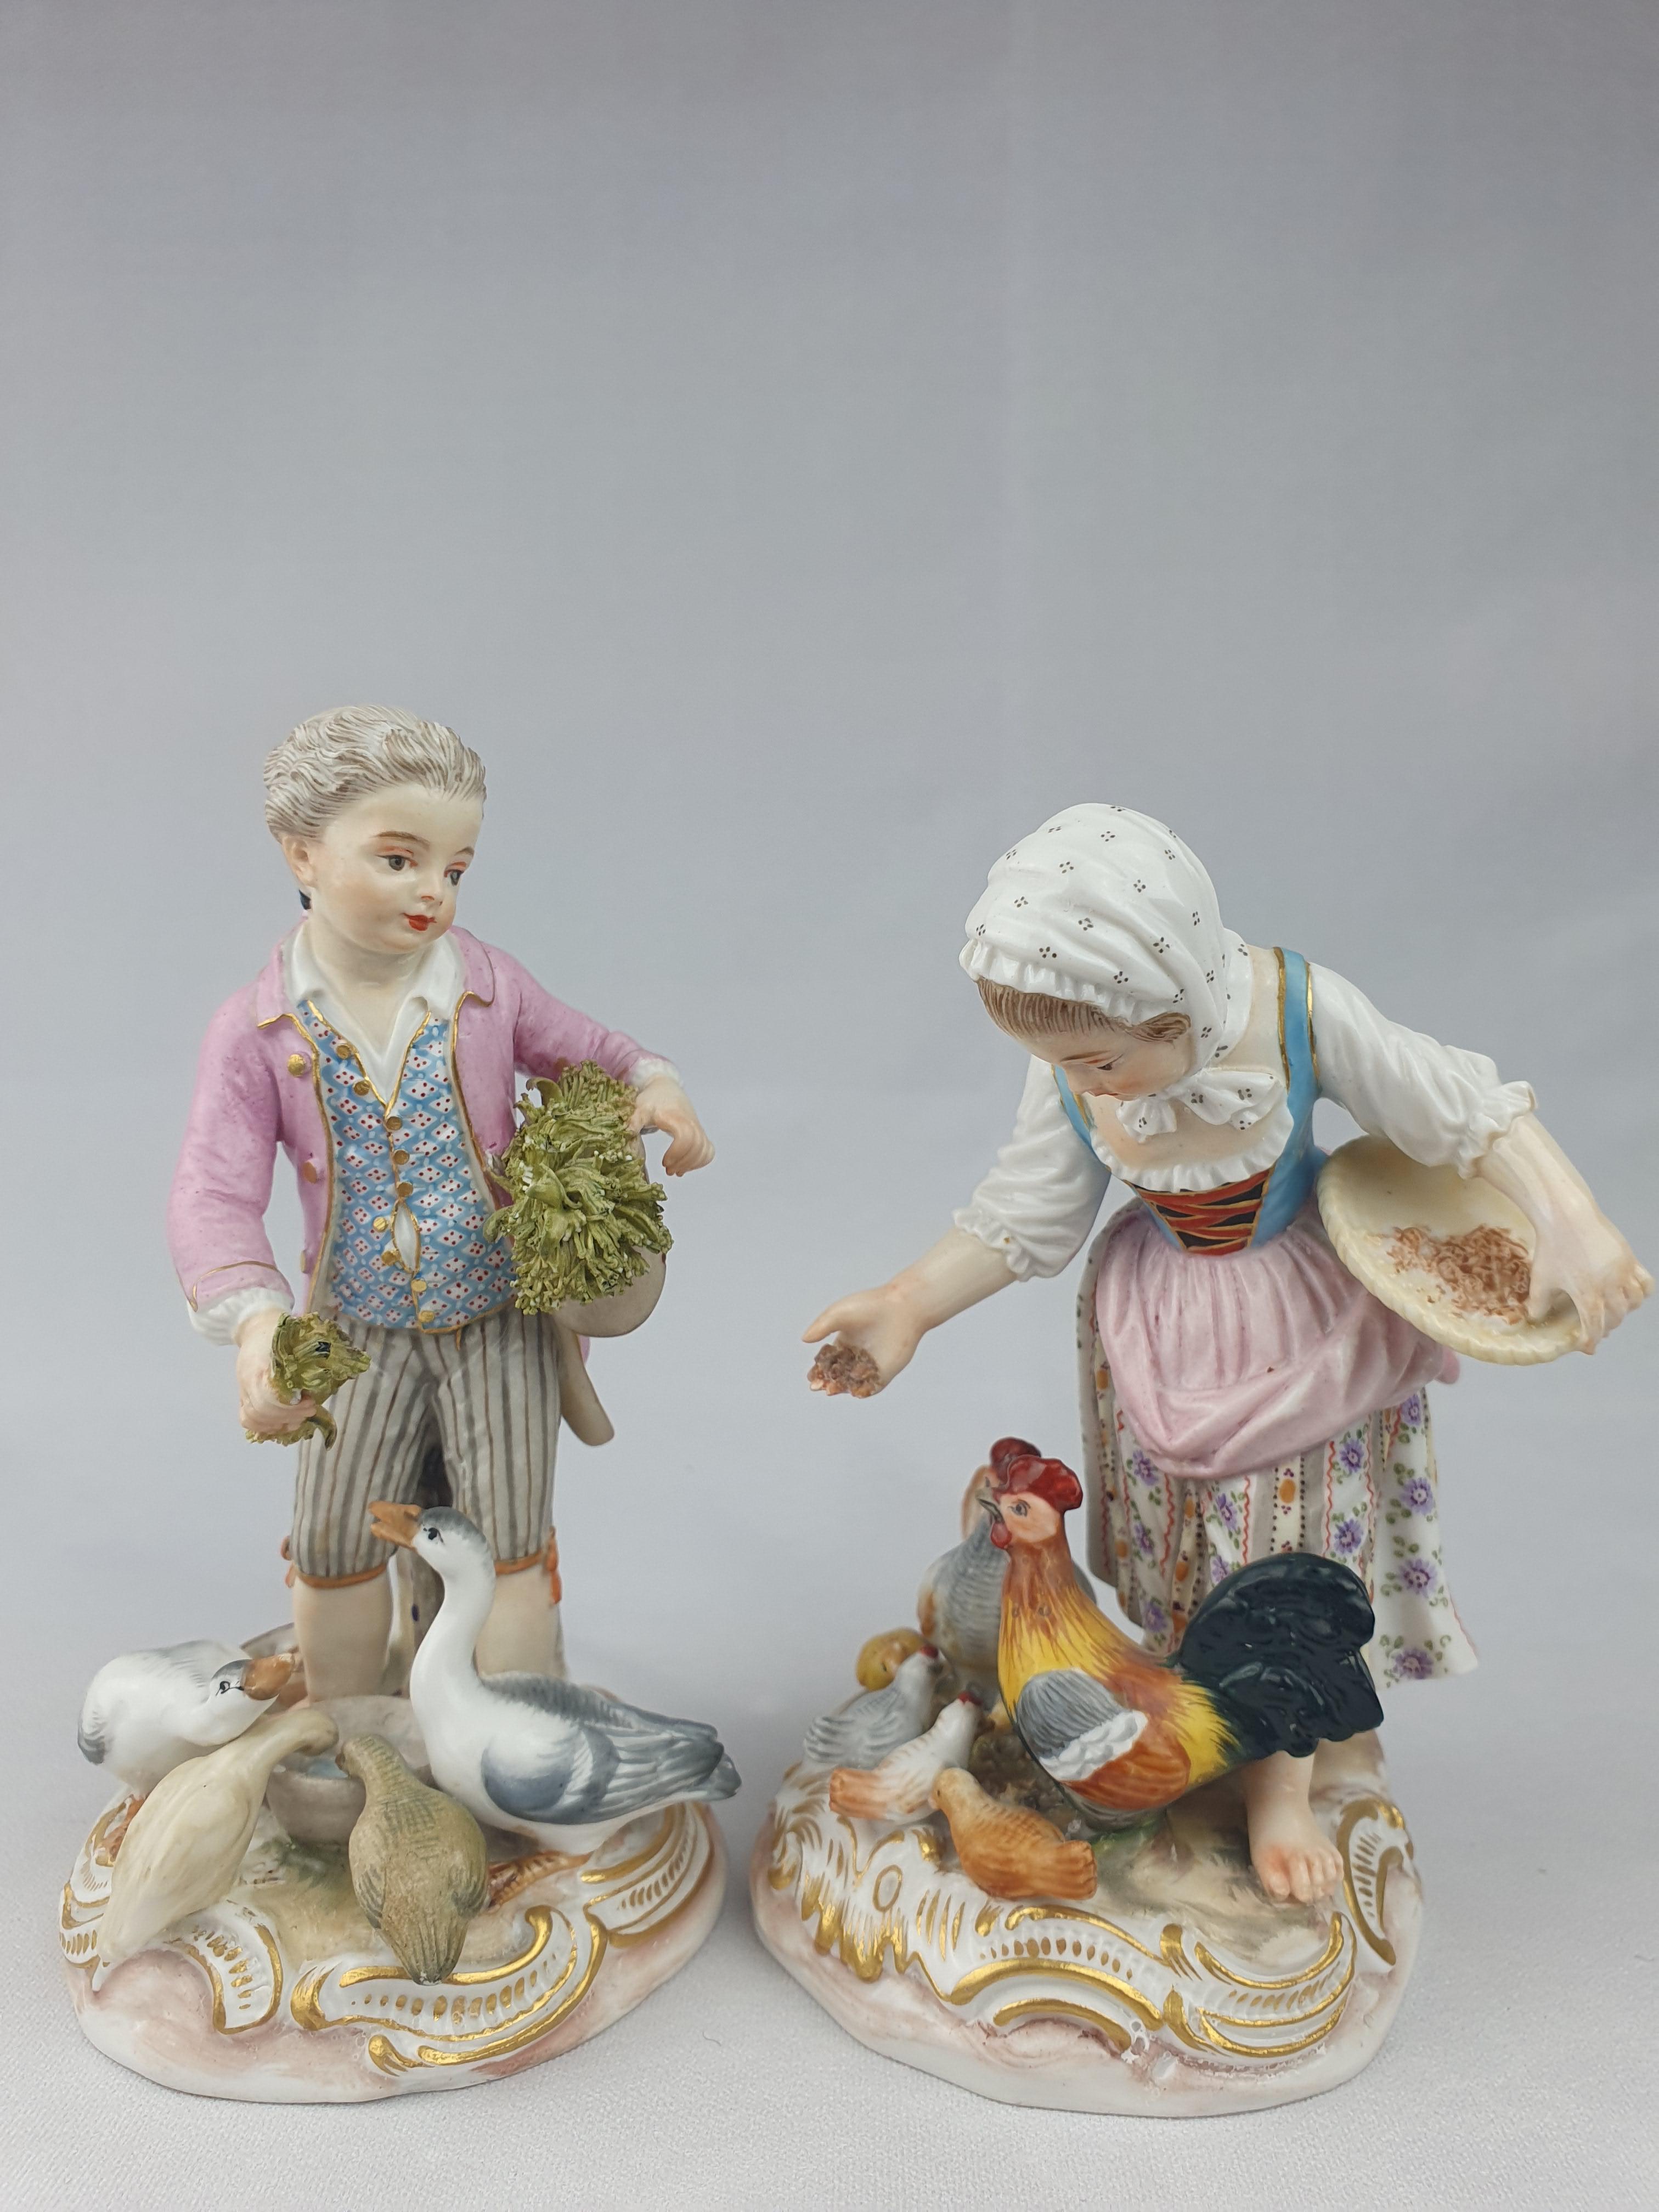 Pair of Meissen Figures. The girl feeding chickens, the boy feeding geese. The pair first modelled by J.J Kaendler in 1761.
This pair circa 1870.

Both figures with underglaze blue cross-swords. Matching painters numbers 64 in red.
Height of